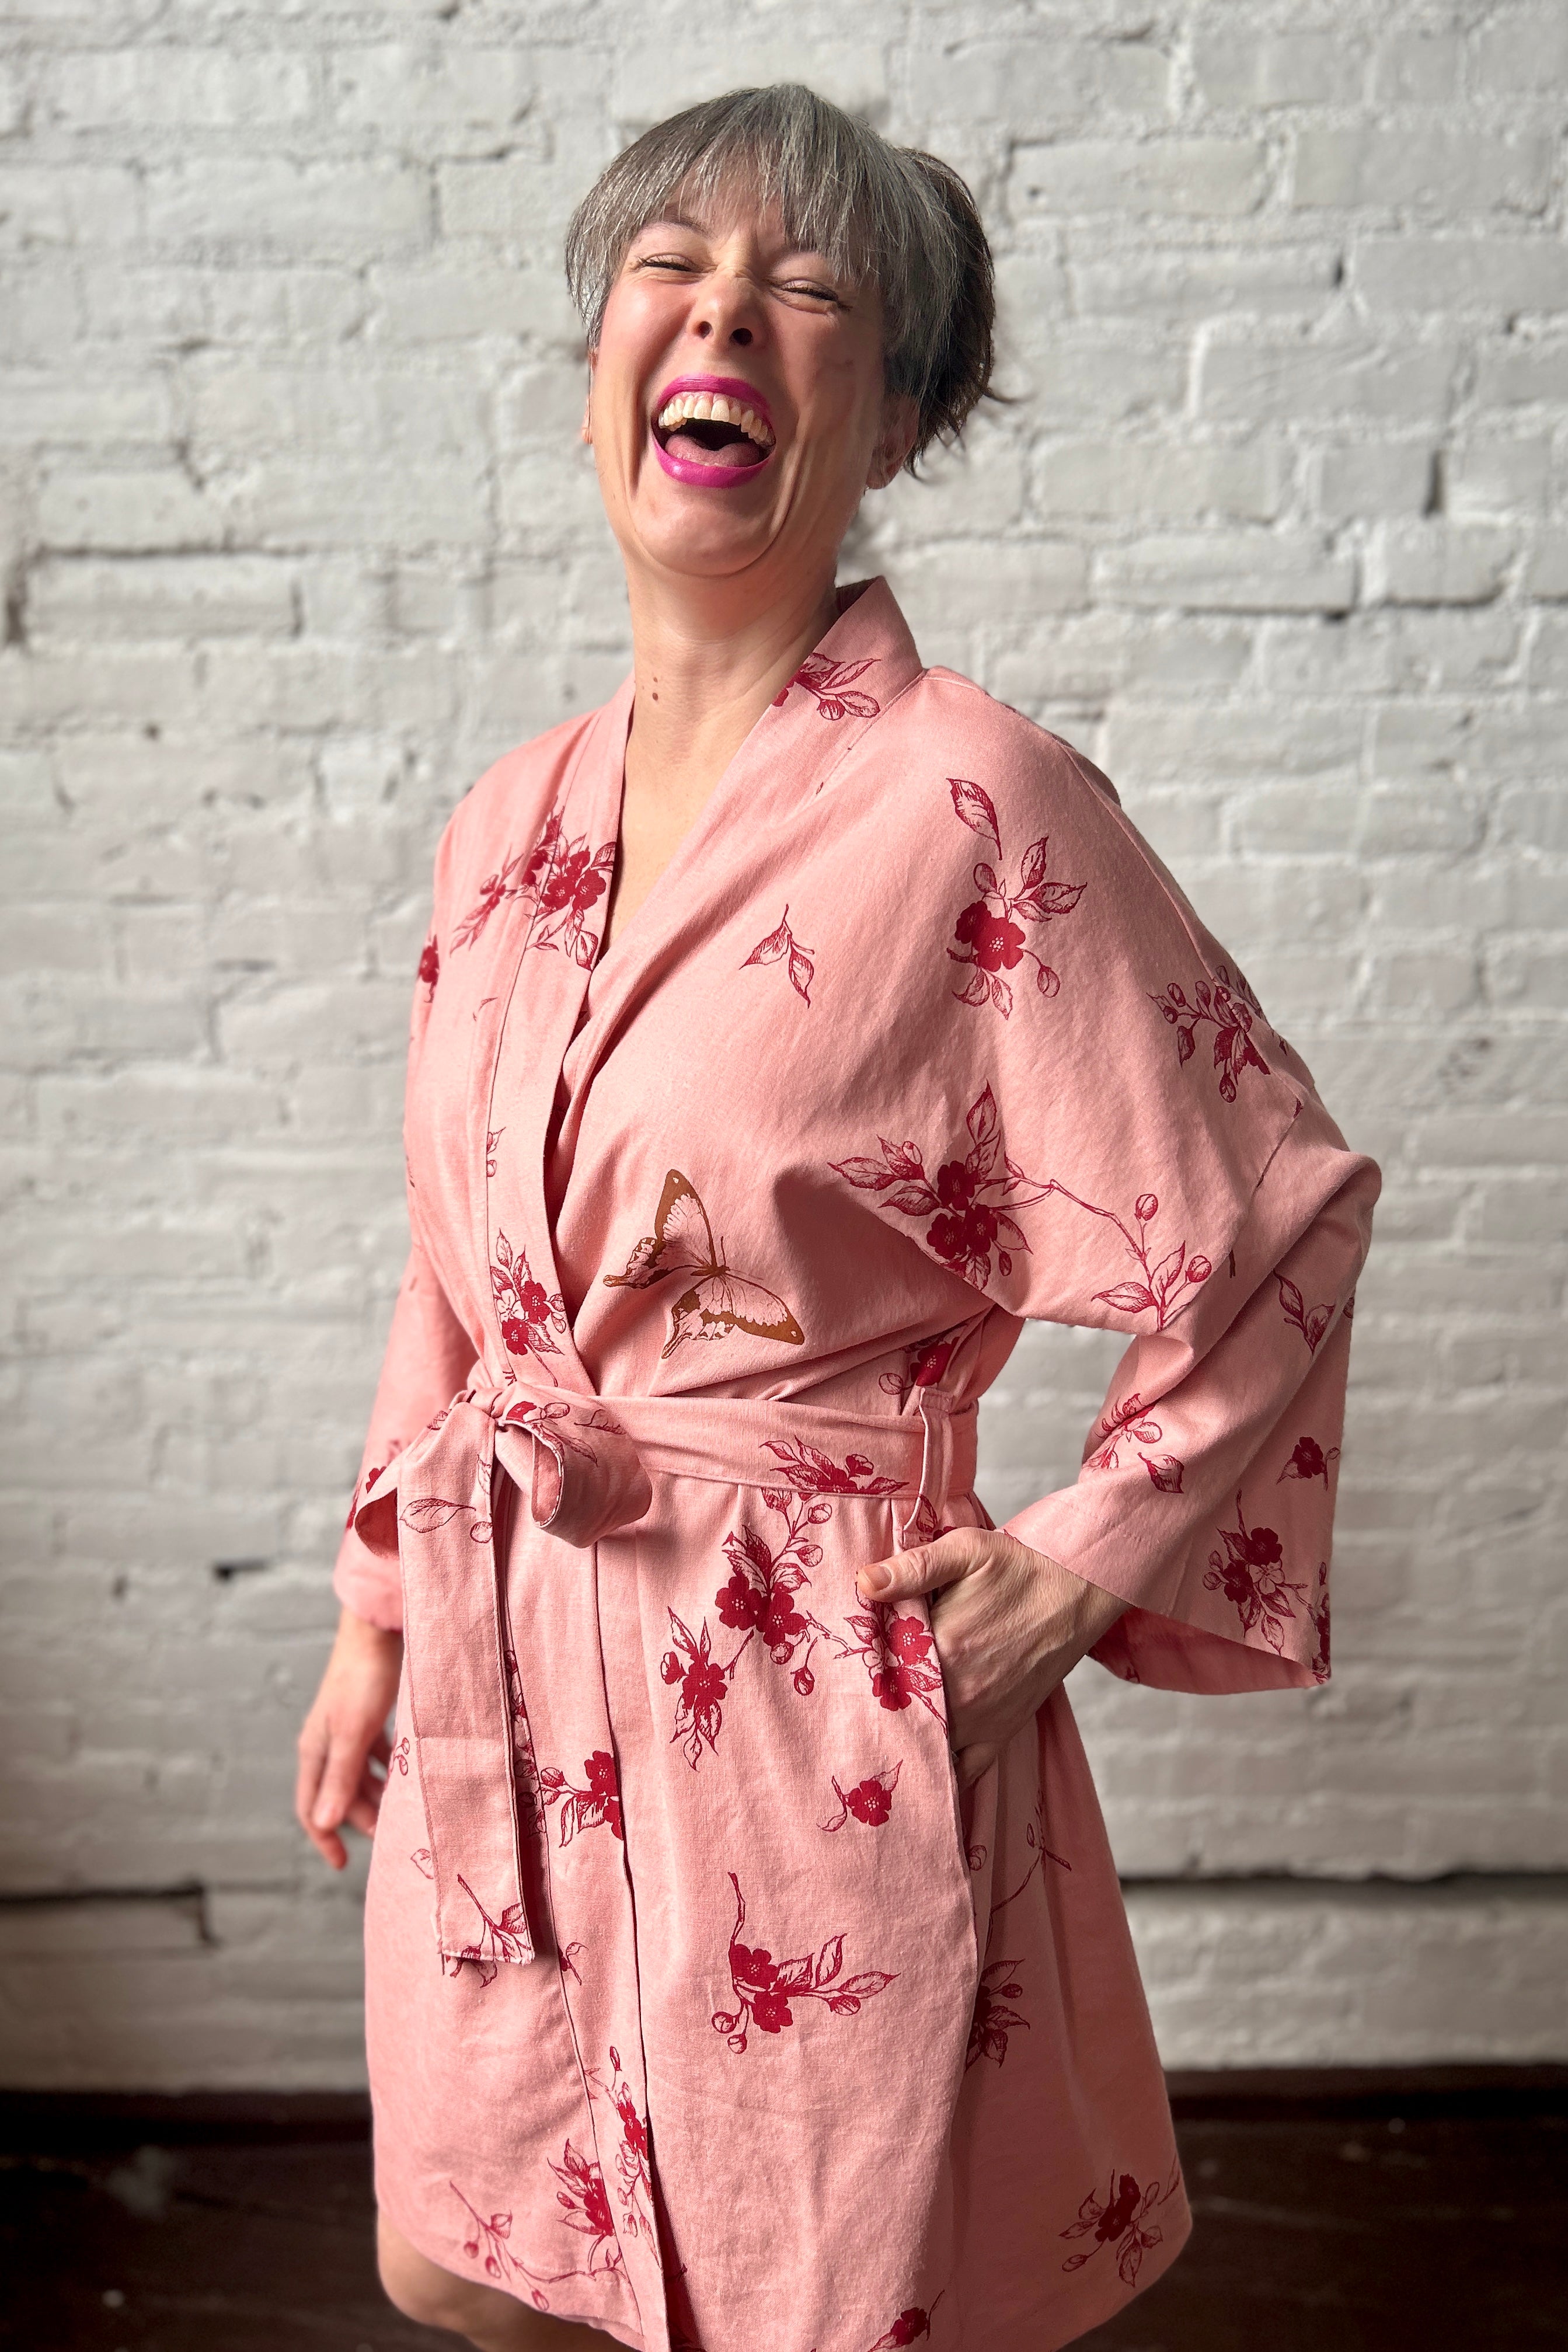 Laughing woman models a knee-length blush pink robe tied at the waist. Robe has loose sleeves, a long sash belt and large pockets. The fabric features a red apple blossom repeat print and various bugs printed in brown ink.